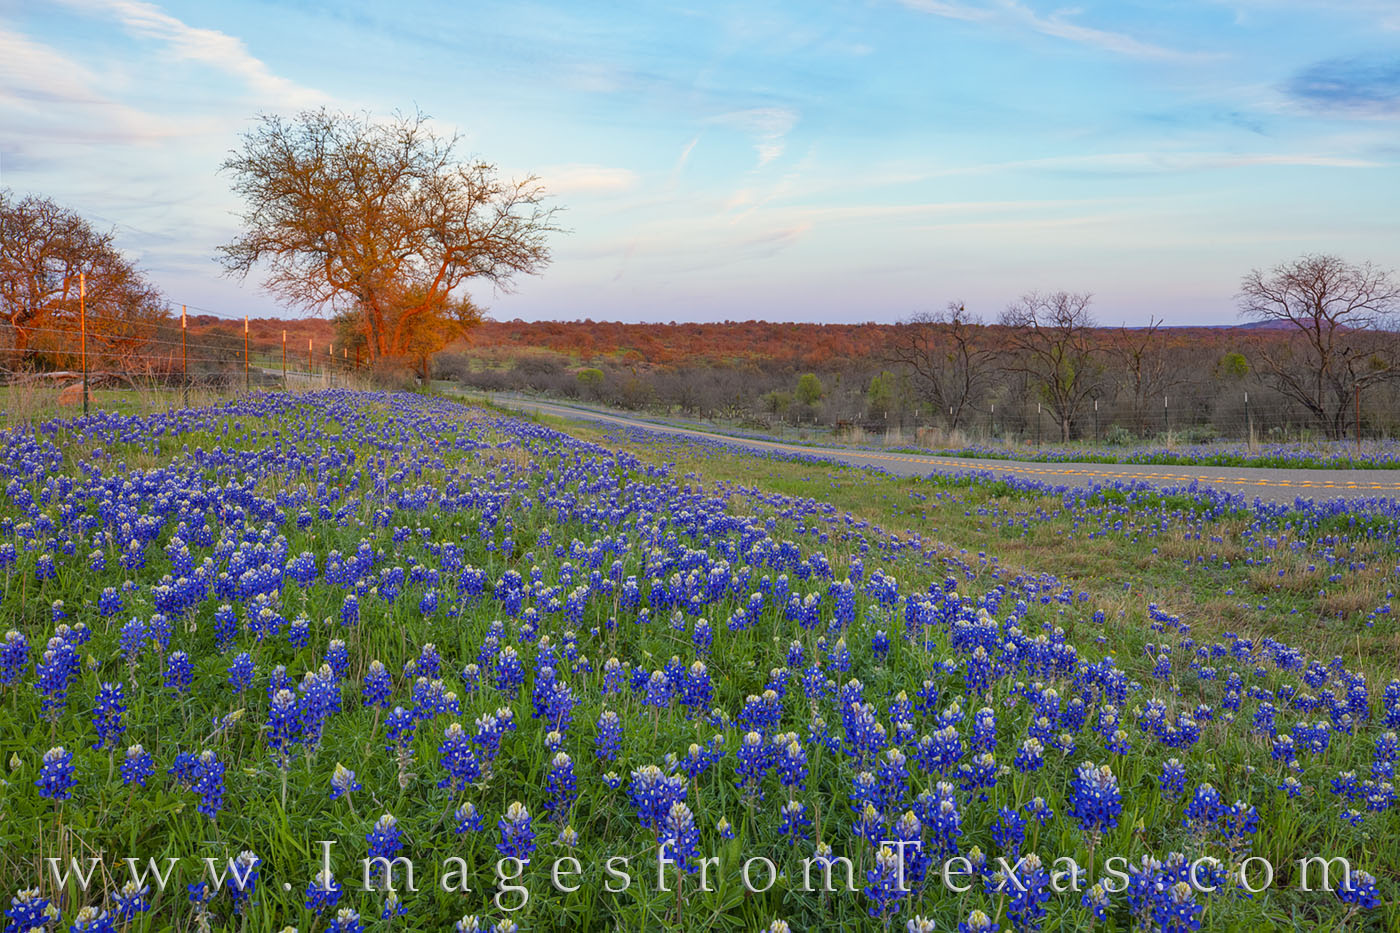 On a wandering path in the Texas HIll Country between Llano and Mason, bluebonnets filled the roadside on farm to market road...